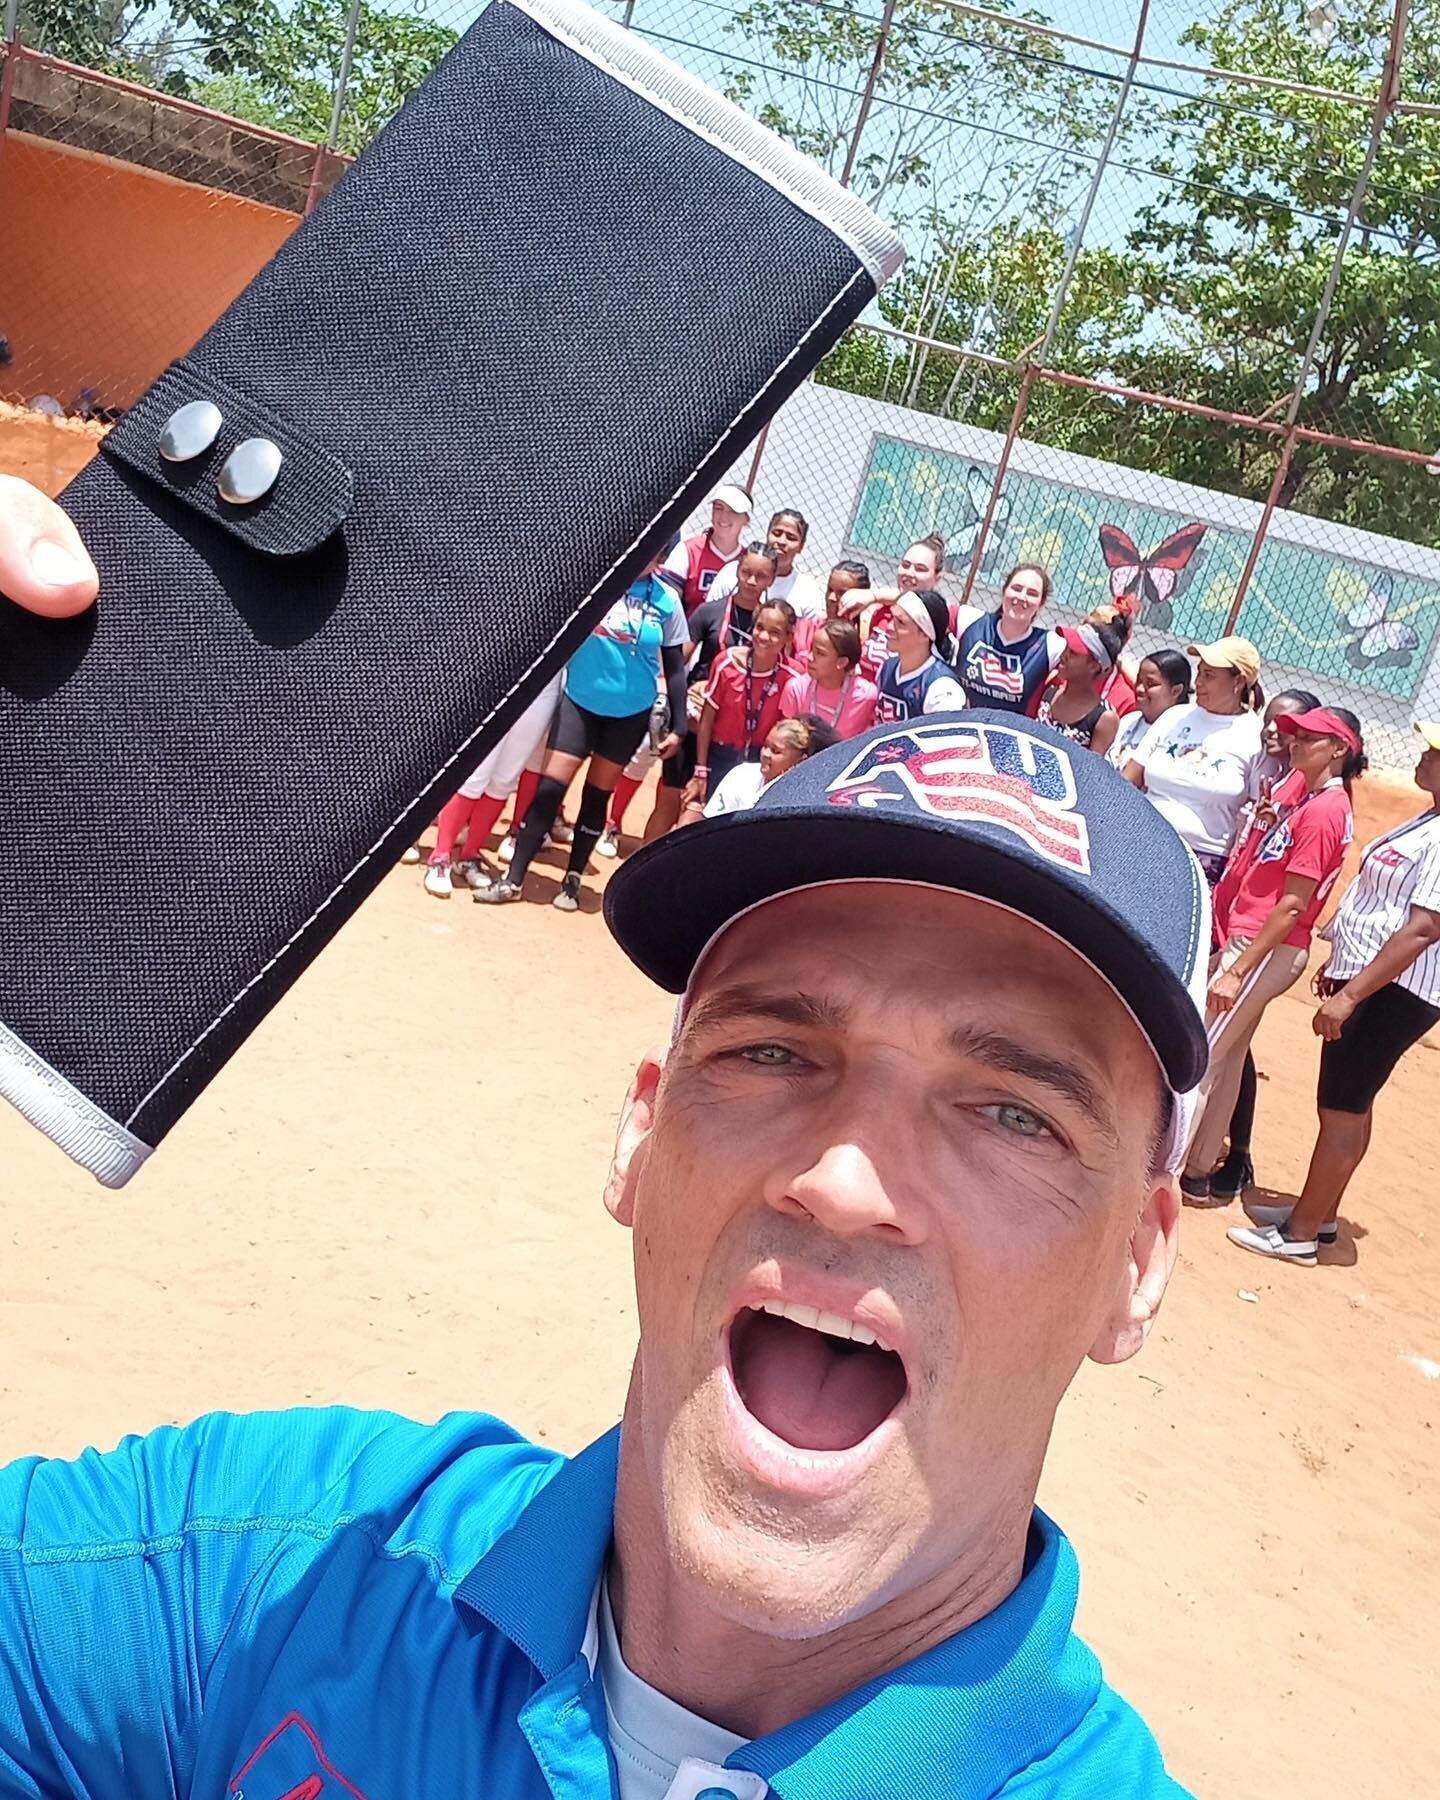 Hold your Fold high!
#miracleadwallet on location in the DR! 
Thanks, Richard!
#absa #girlsFastPitch